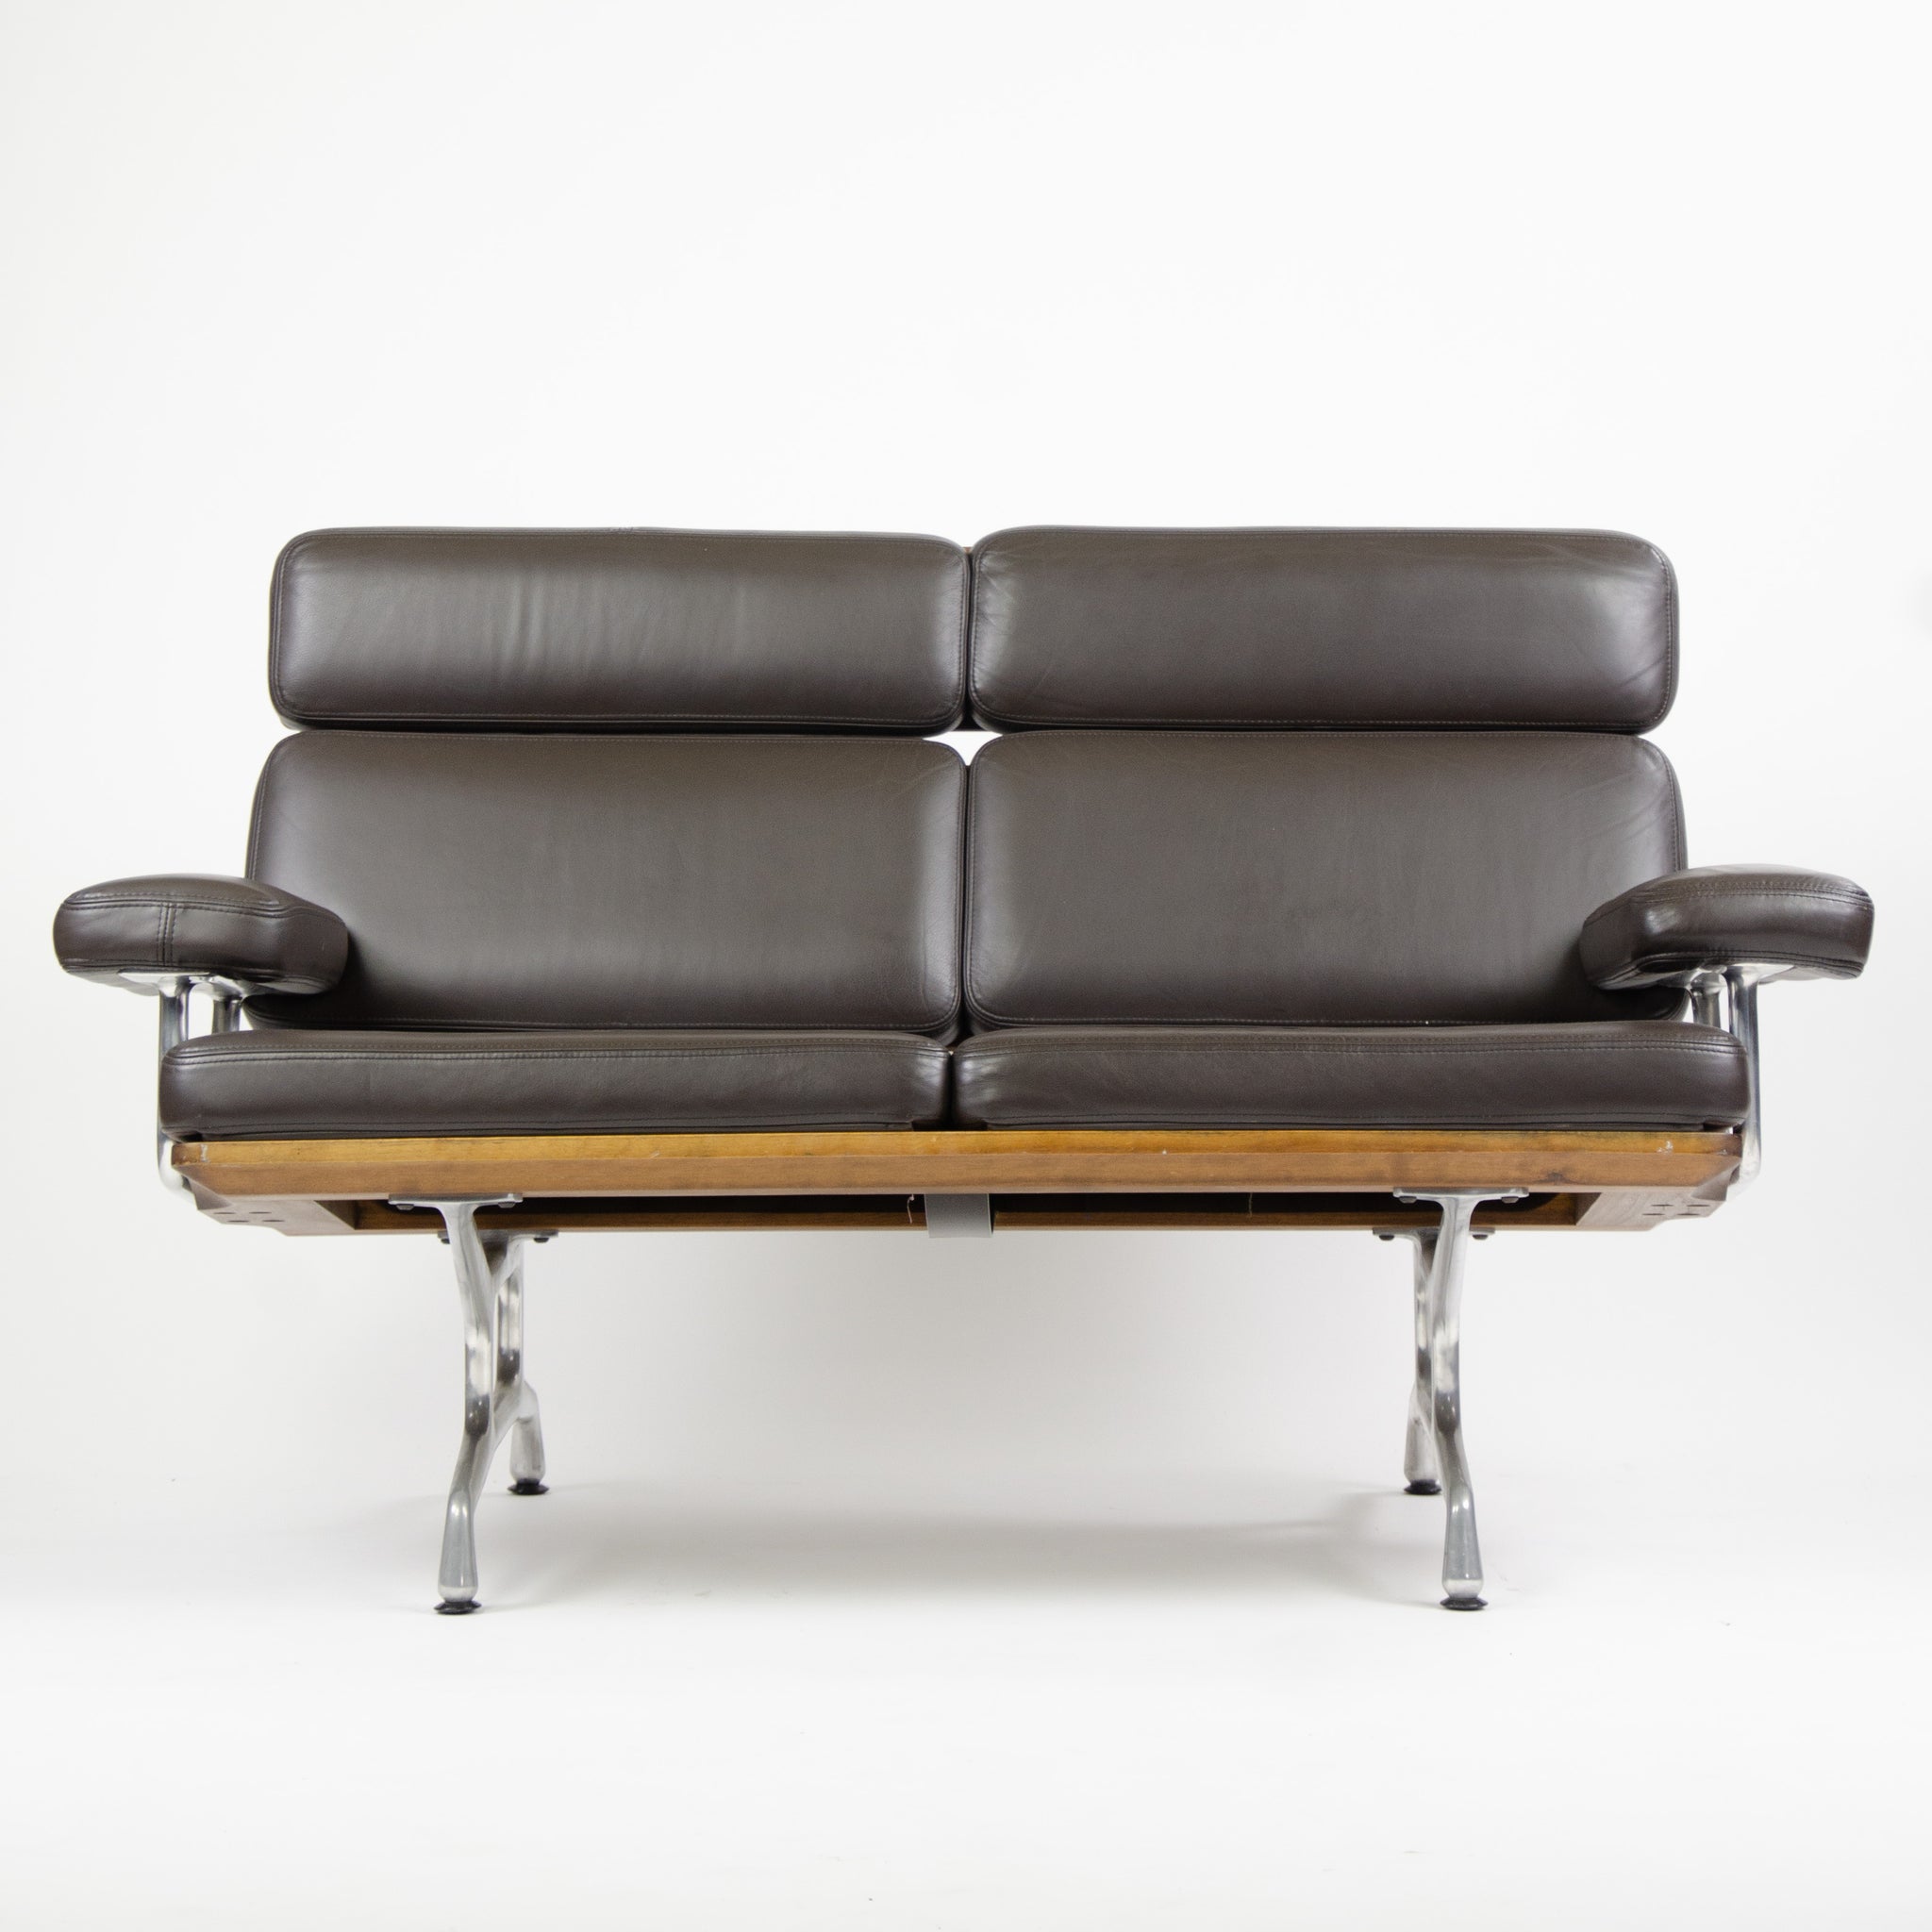 SOLD 2007 Eames Herman Miller Two Seater Sofa Walnut and Brown Leather